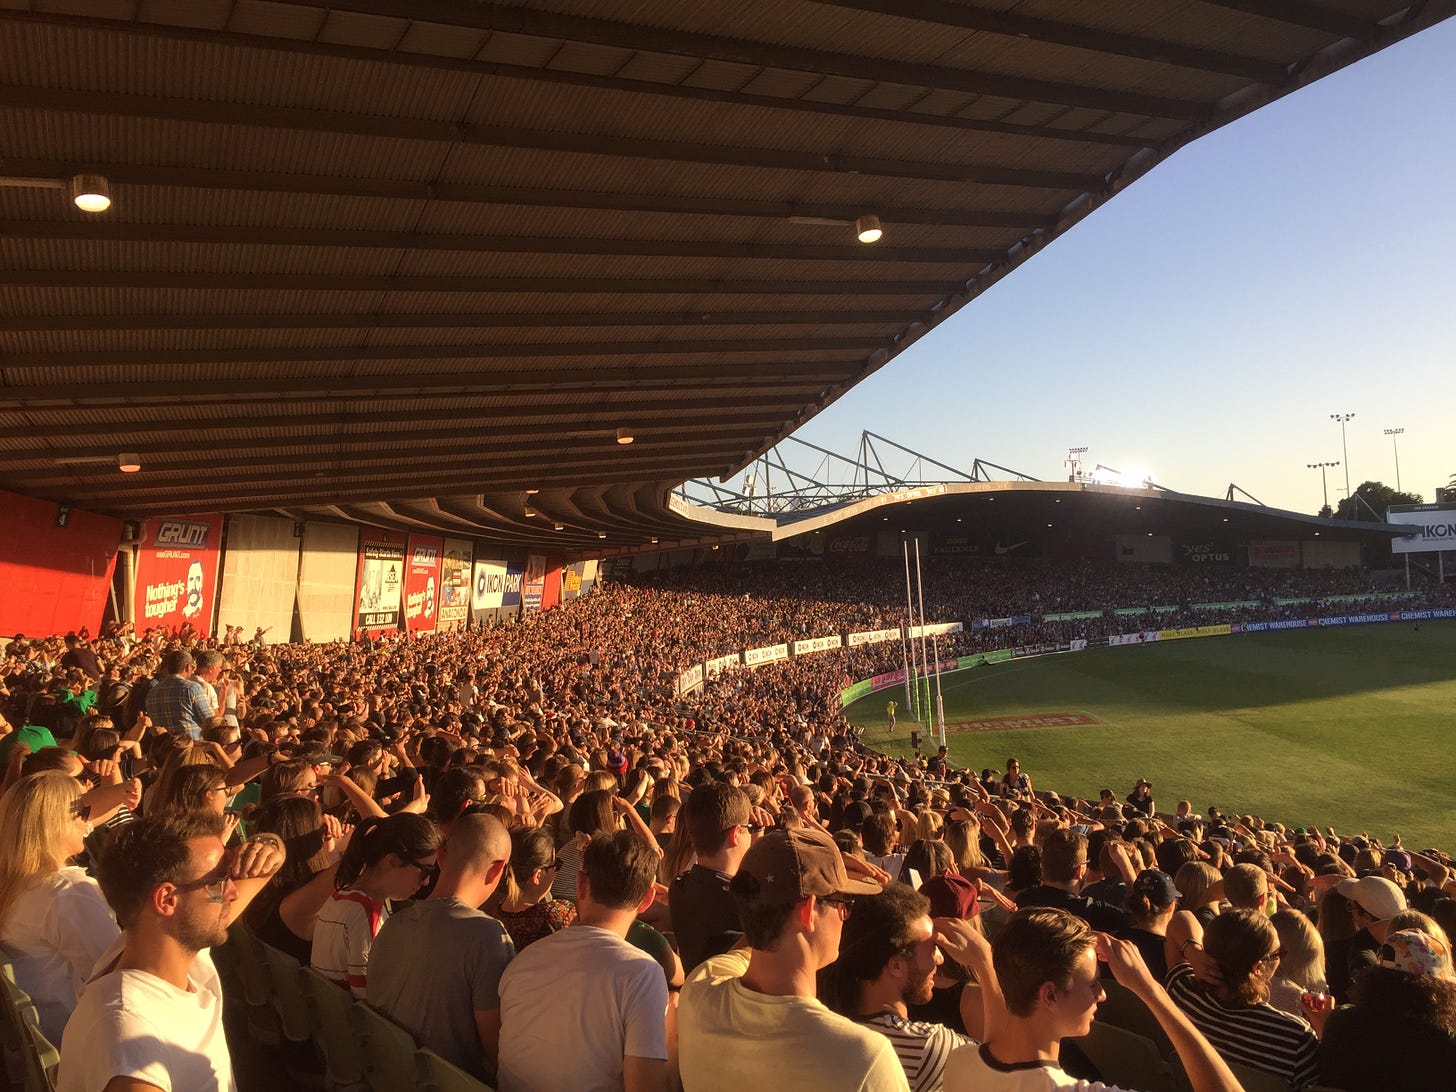 A photograph of a fully packed crowd at Princes Park stadium. They are all bathed in the golden glow of the setting sun. Many people are holding the hands up to block the sun. You can see the edge of the green field with the goalposts.